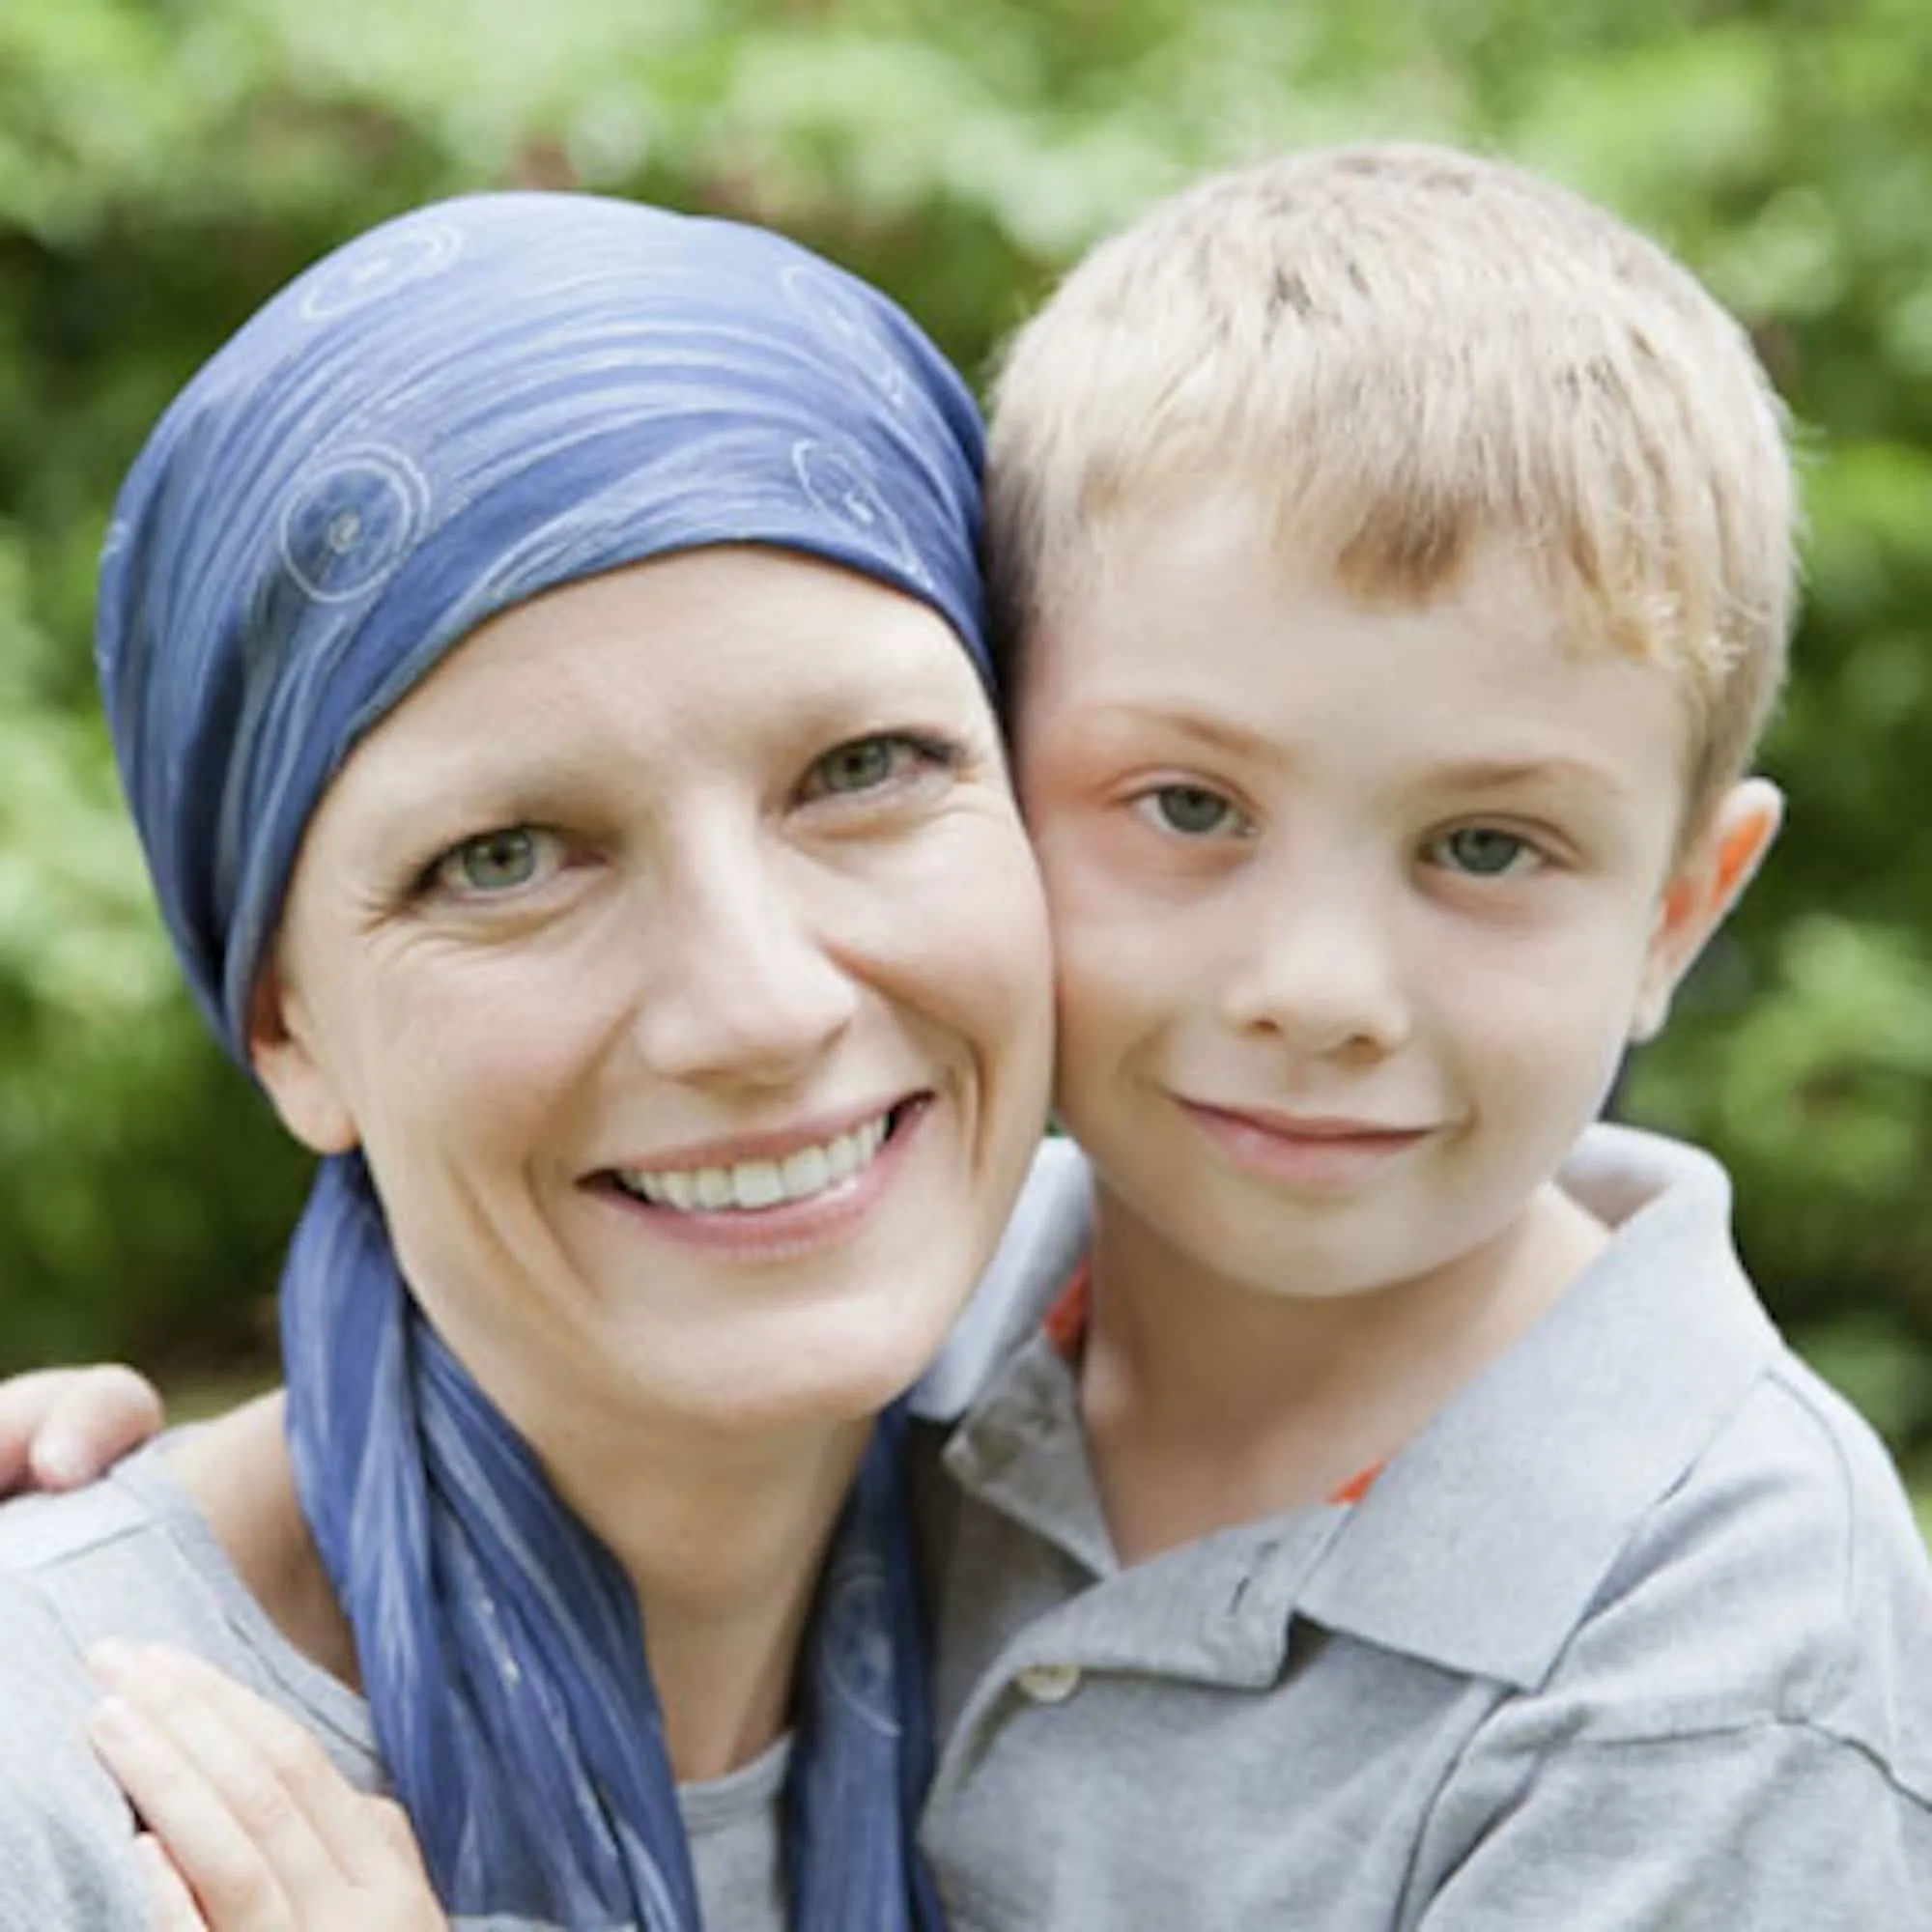 Financial Resources for Alternative Cancer Treatments